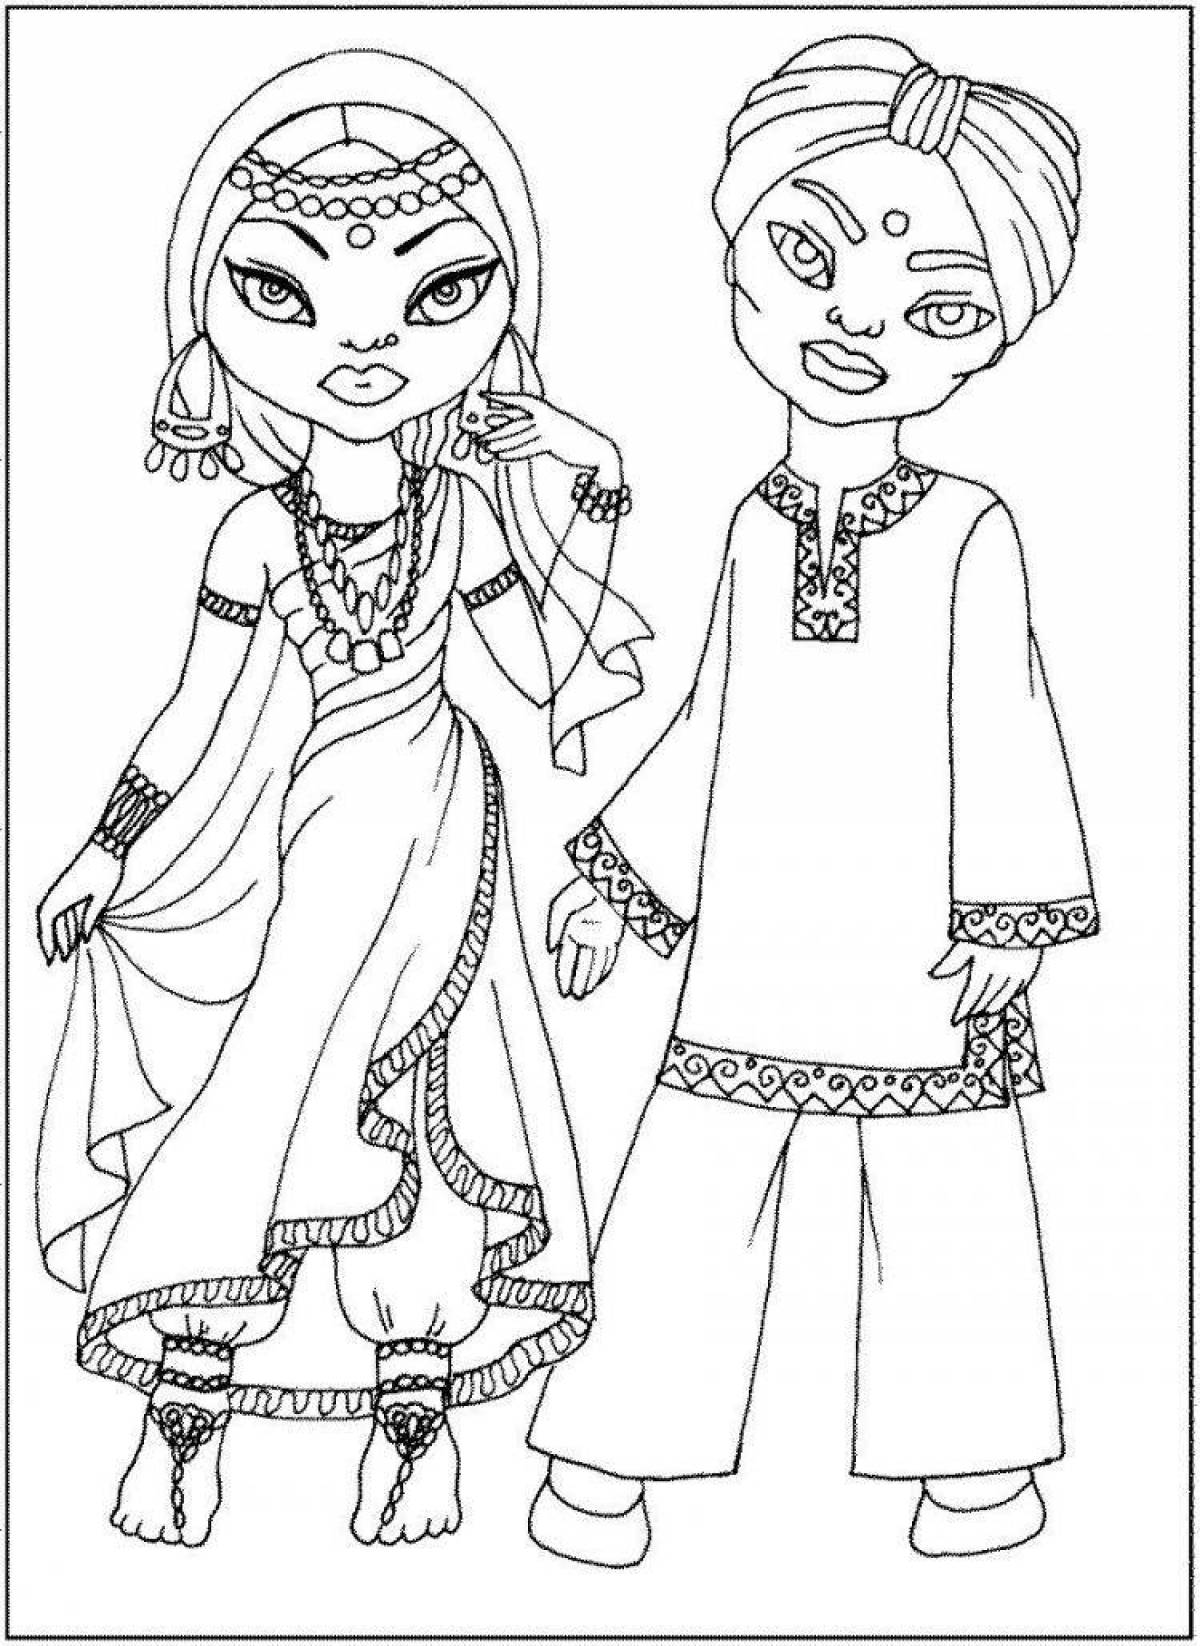 Fine national costume coloring page